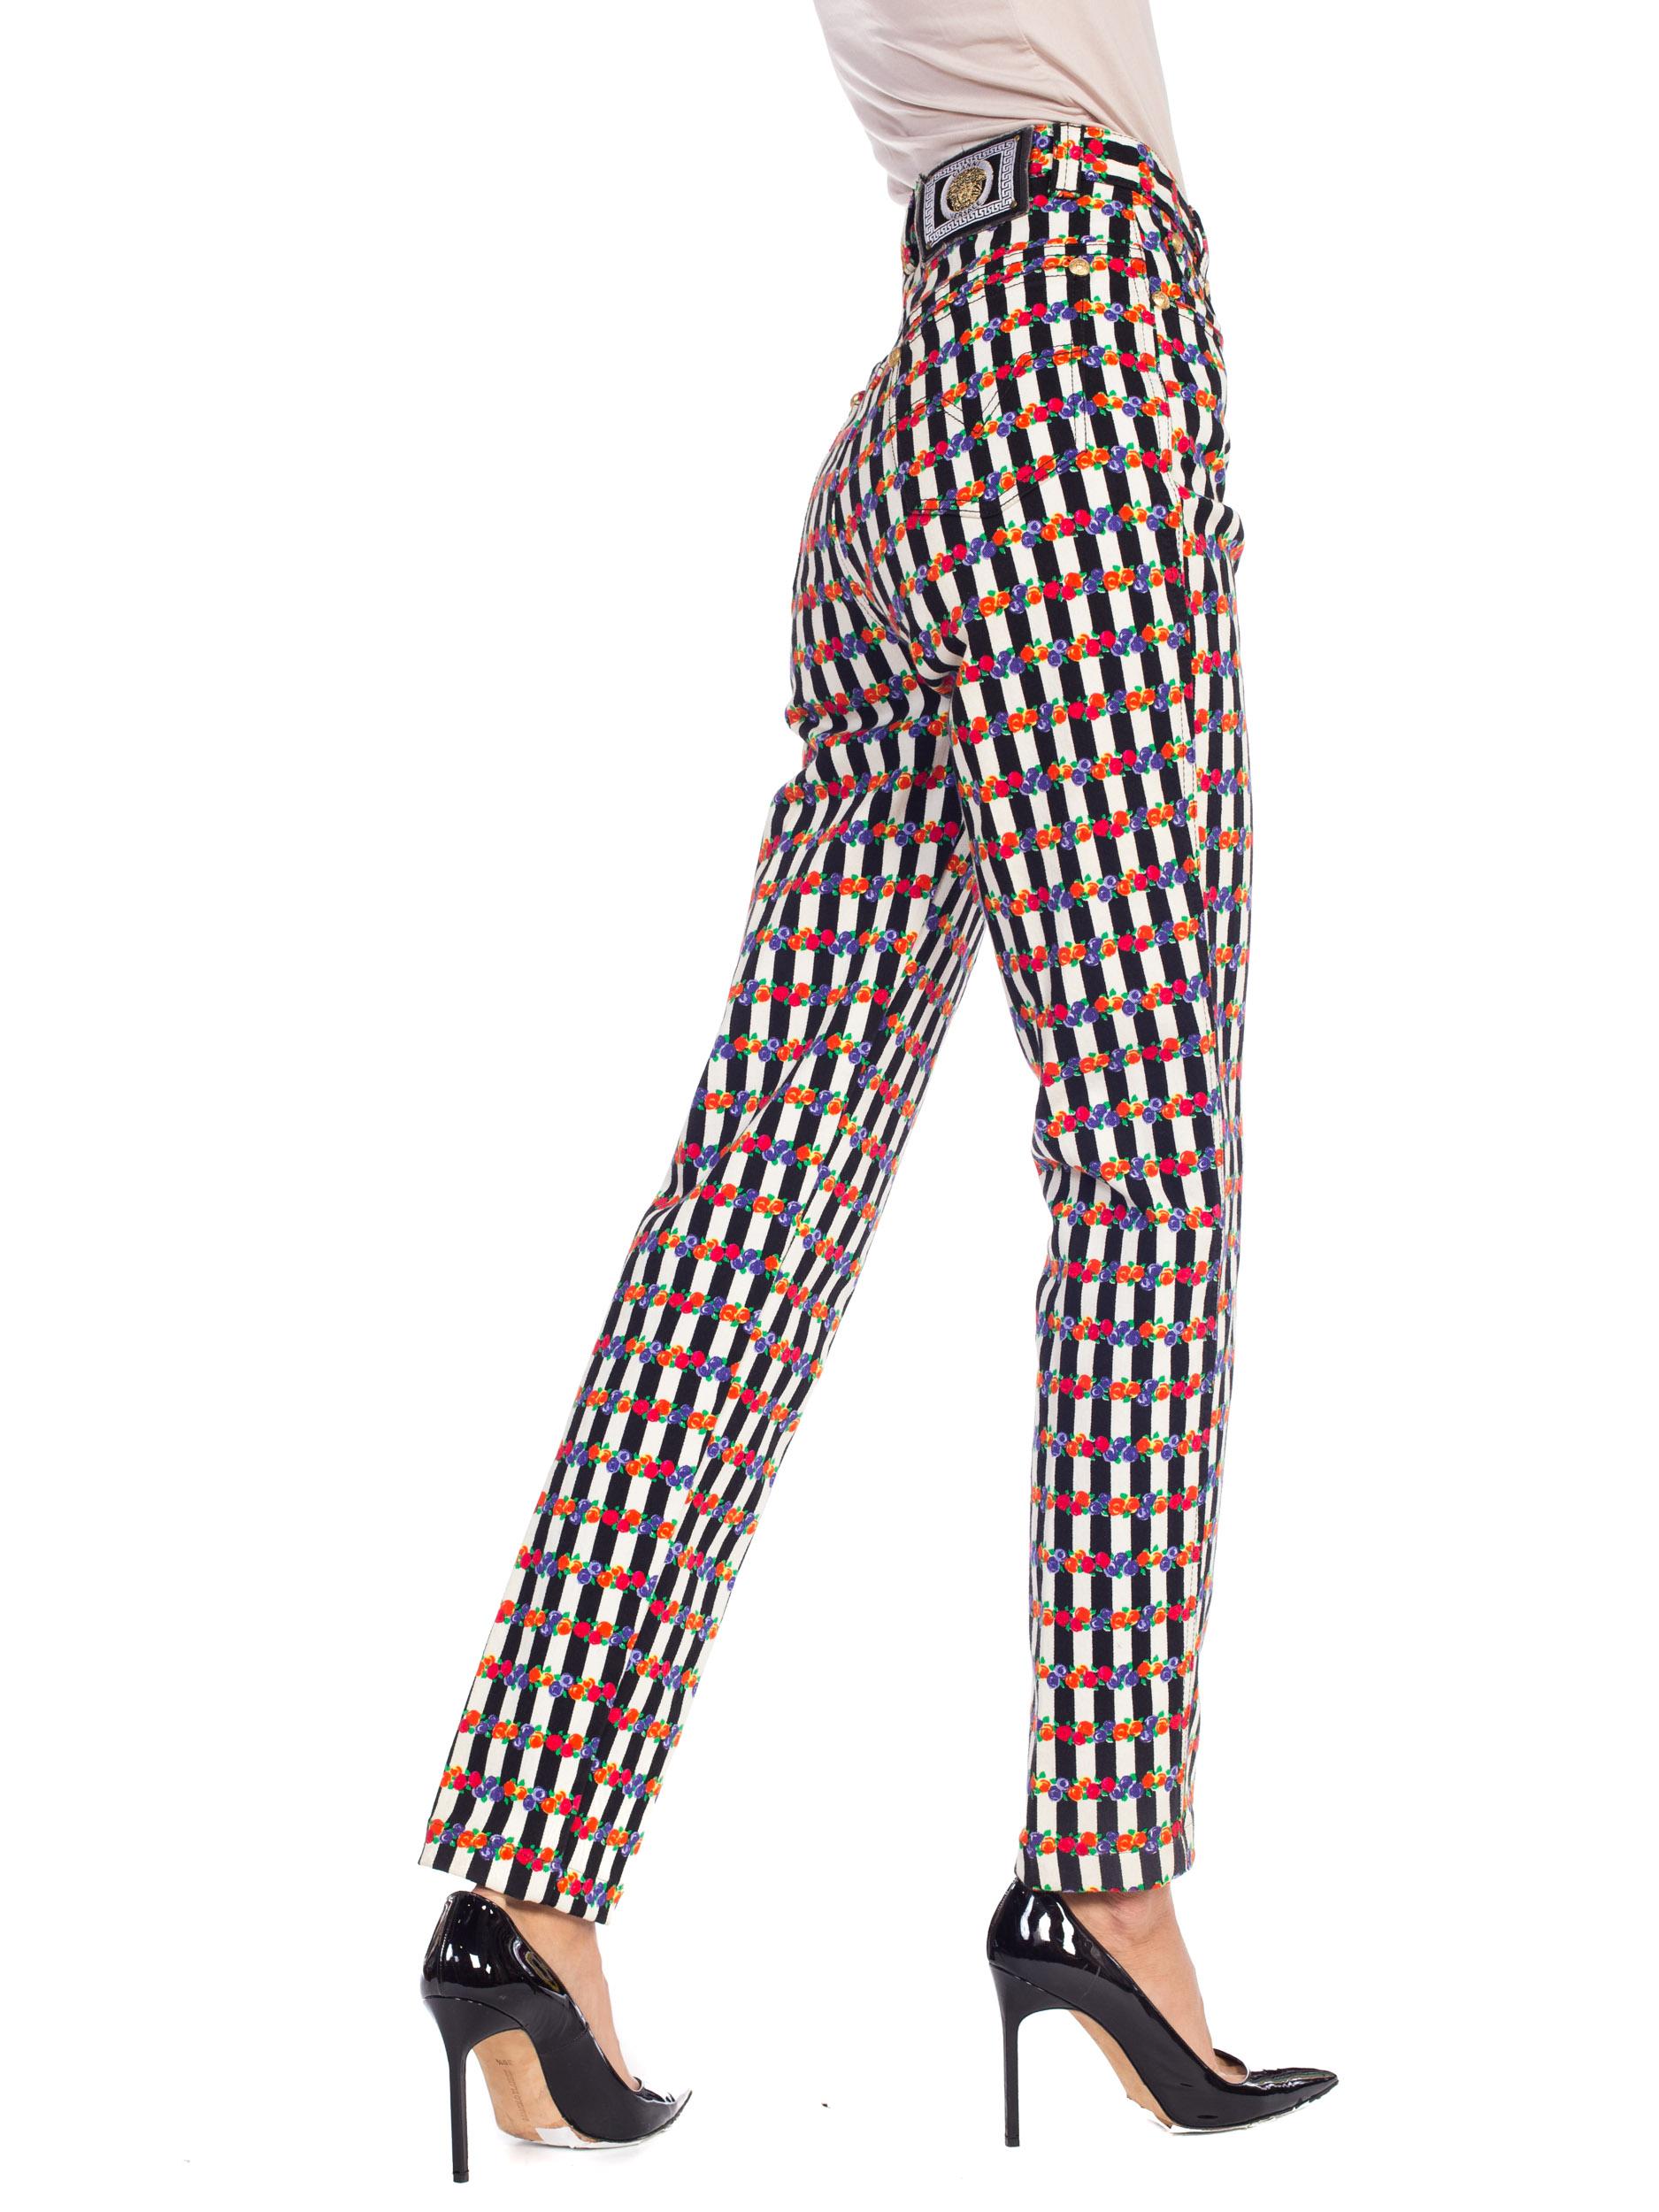 1990S GIANNI VERSACE  Floral Striped Jeans Pants 2